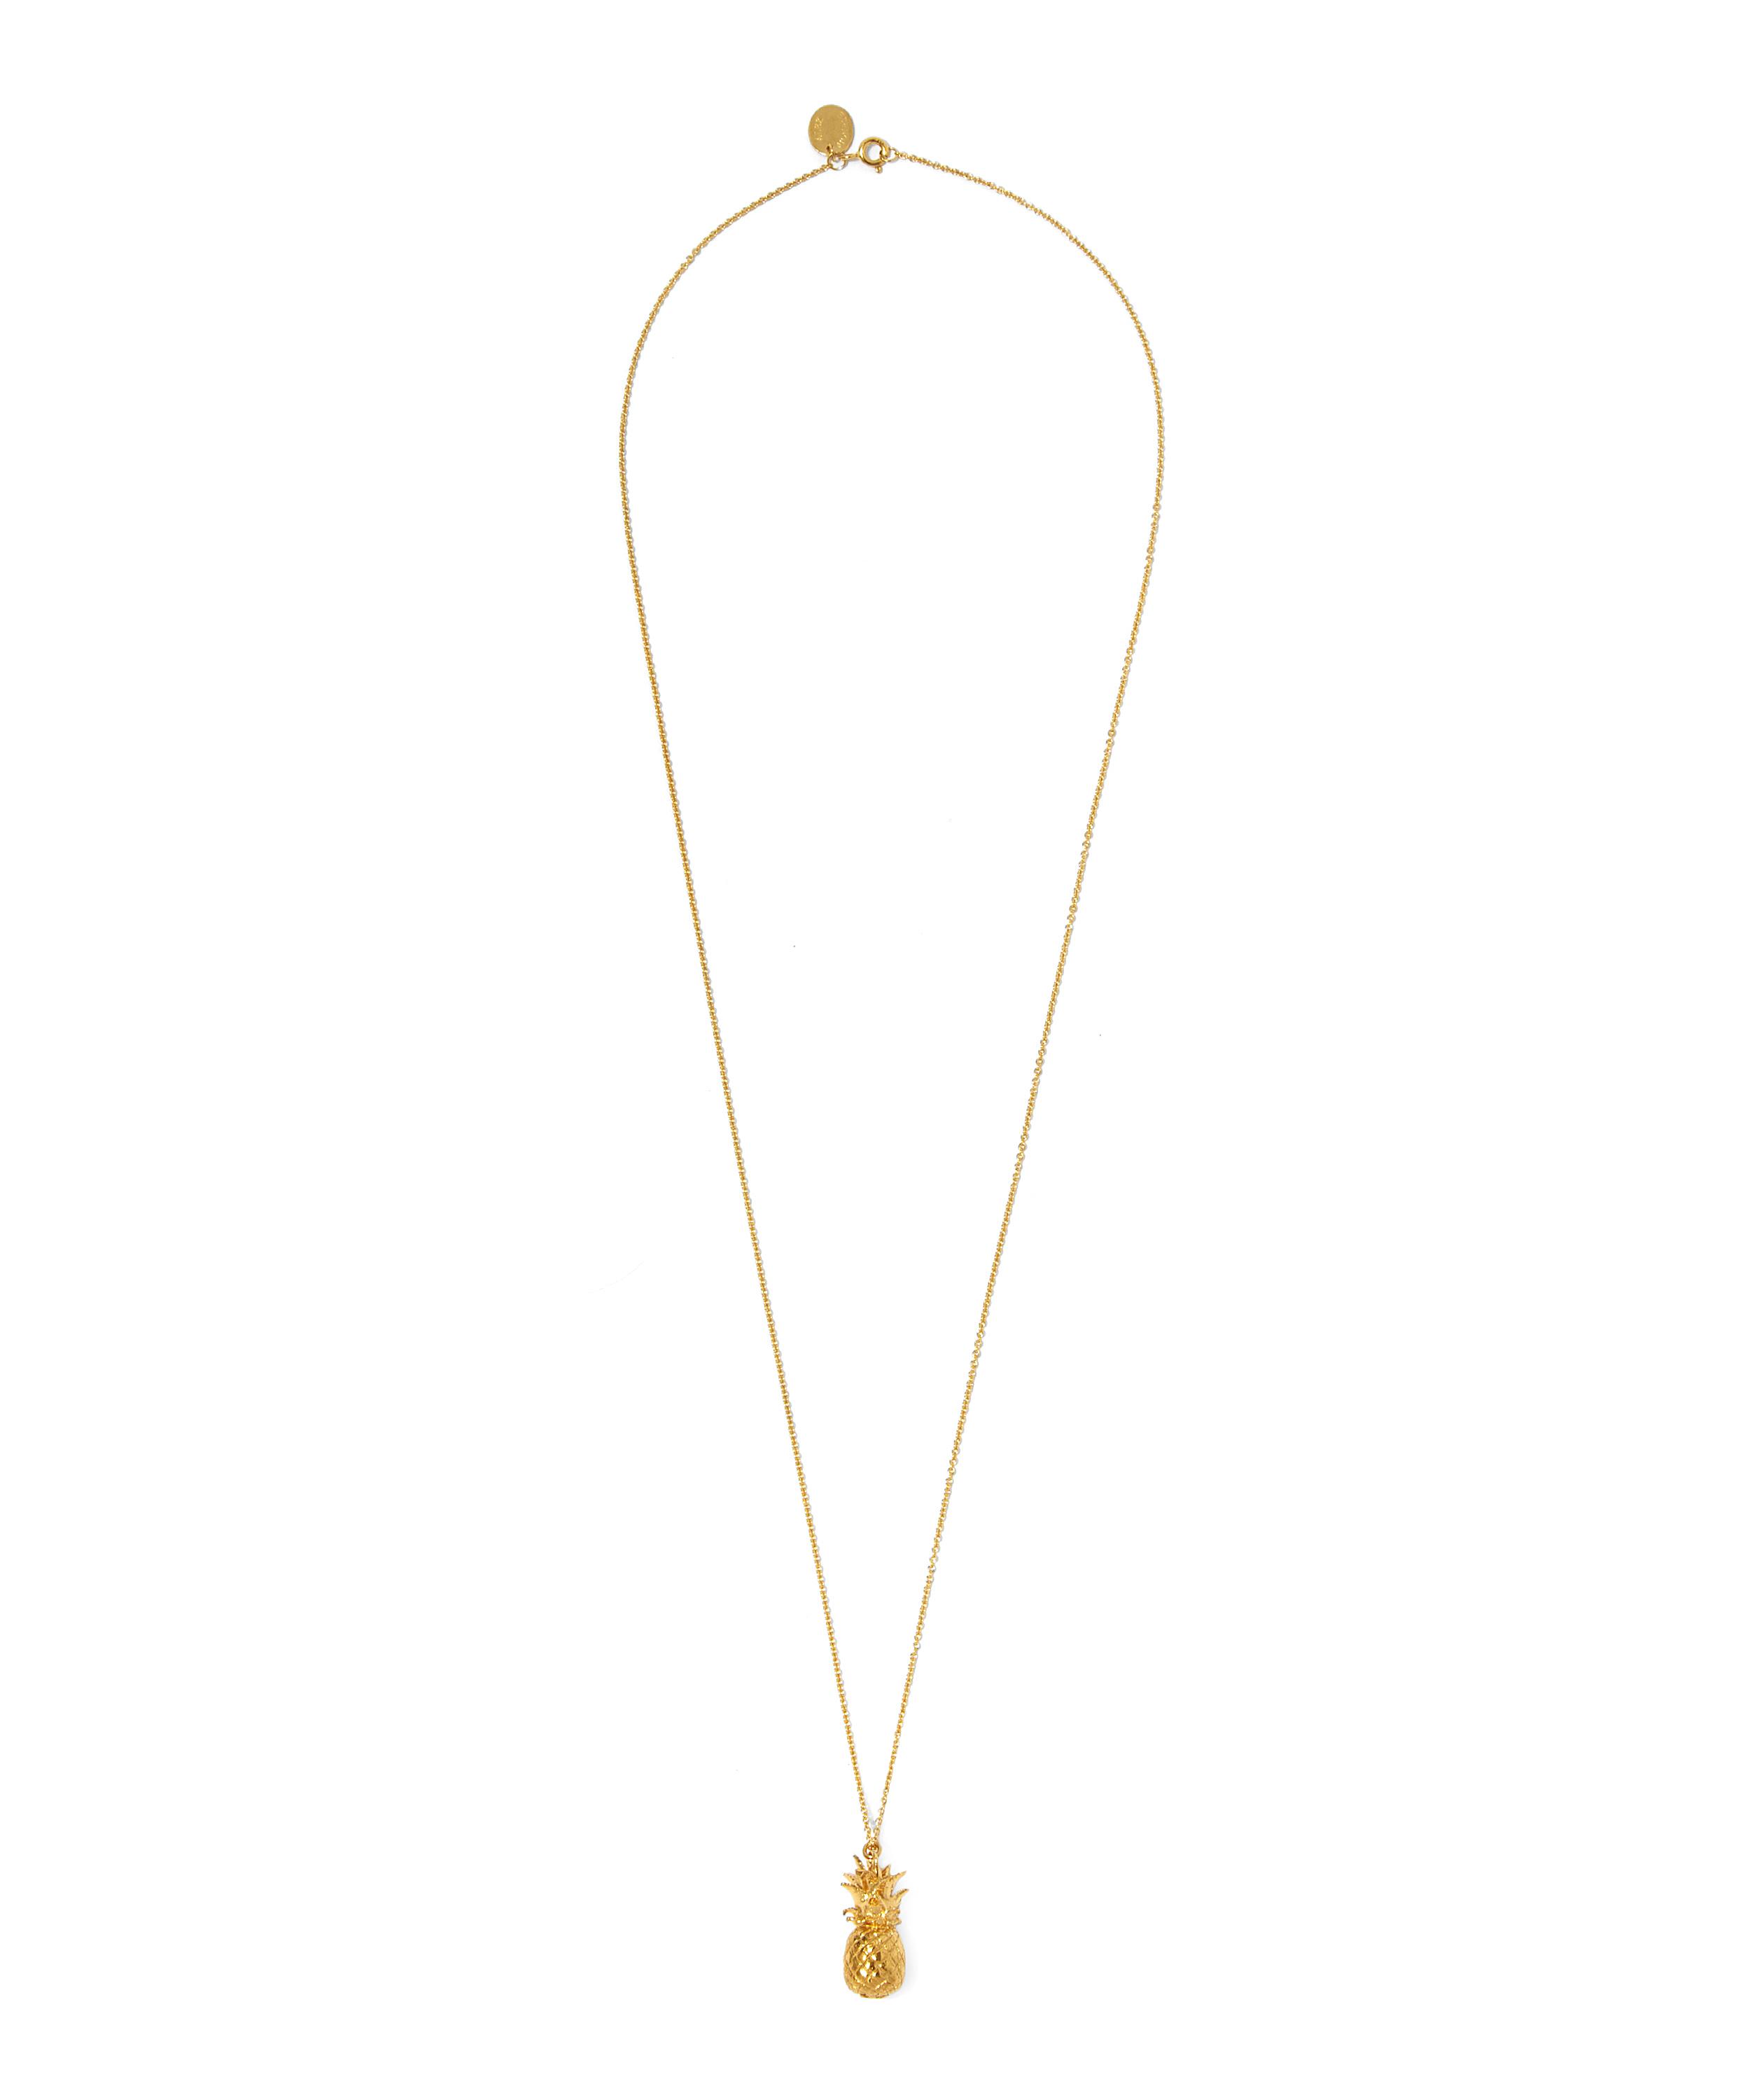 Gold-Plated Pineapple Necklace | Liberty London